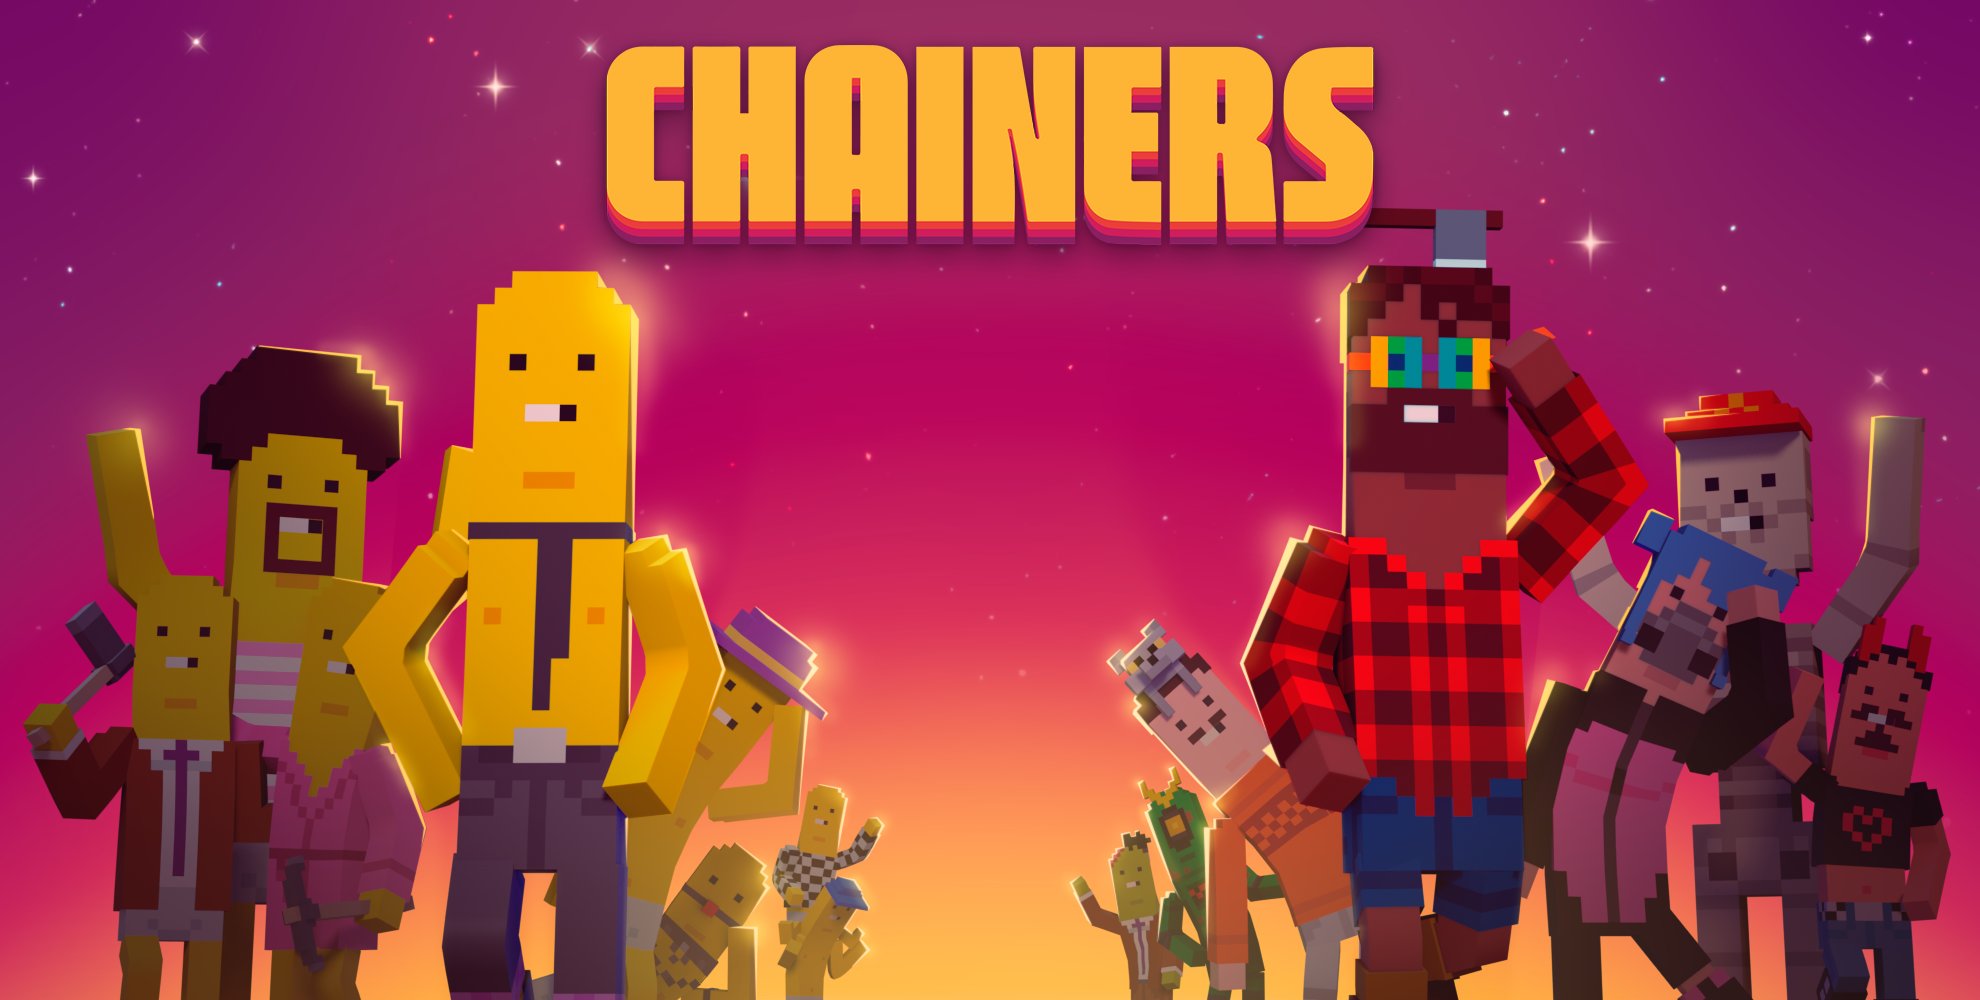 Chainers.io: Unlocking the Potential of NFT Games